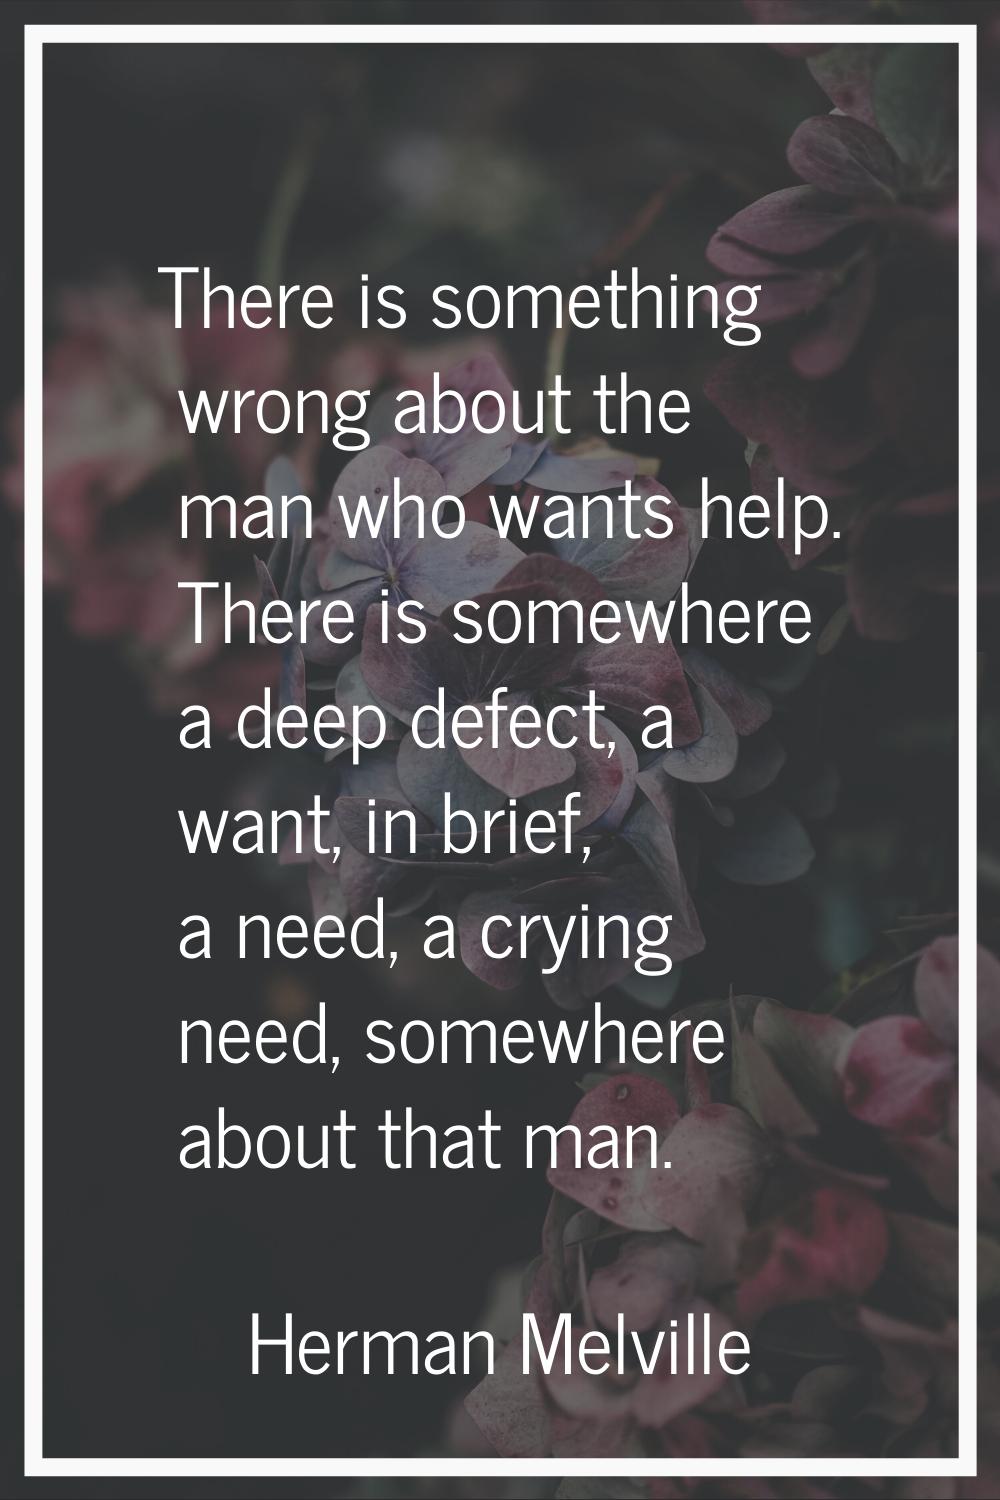 There is something wrong about the man who wants help. There is somewhere a deep defect, a want, in